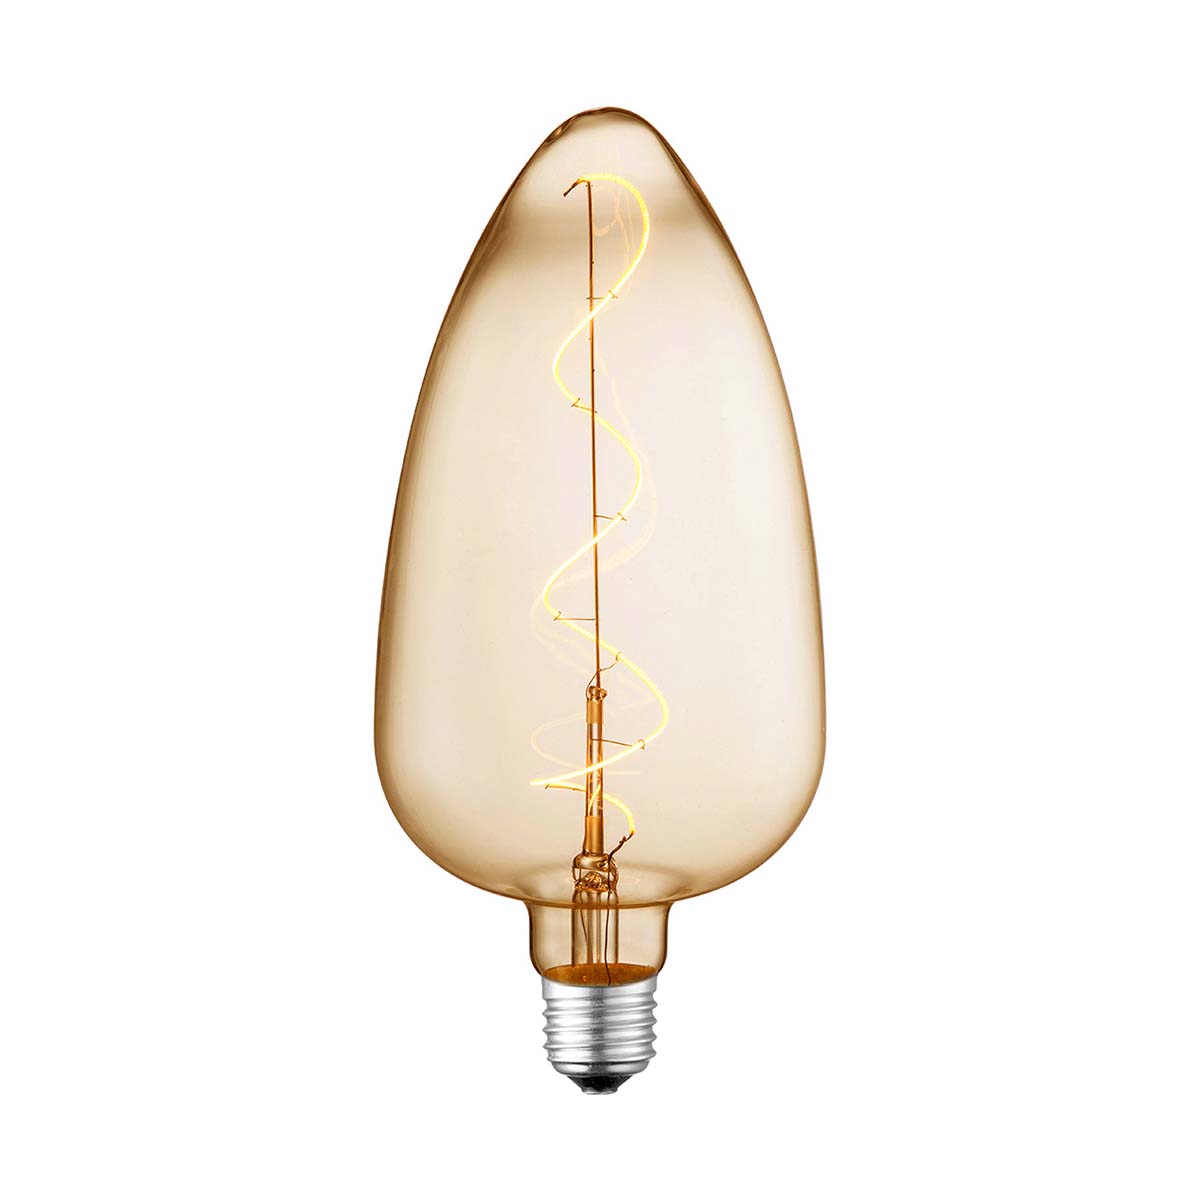 Tangla lighting - TLB-8116-04AM - LED Light Bulb Single Spiral filament - special 4W amber - leaf - dimmable - E27